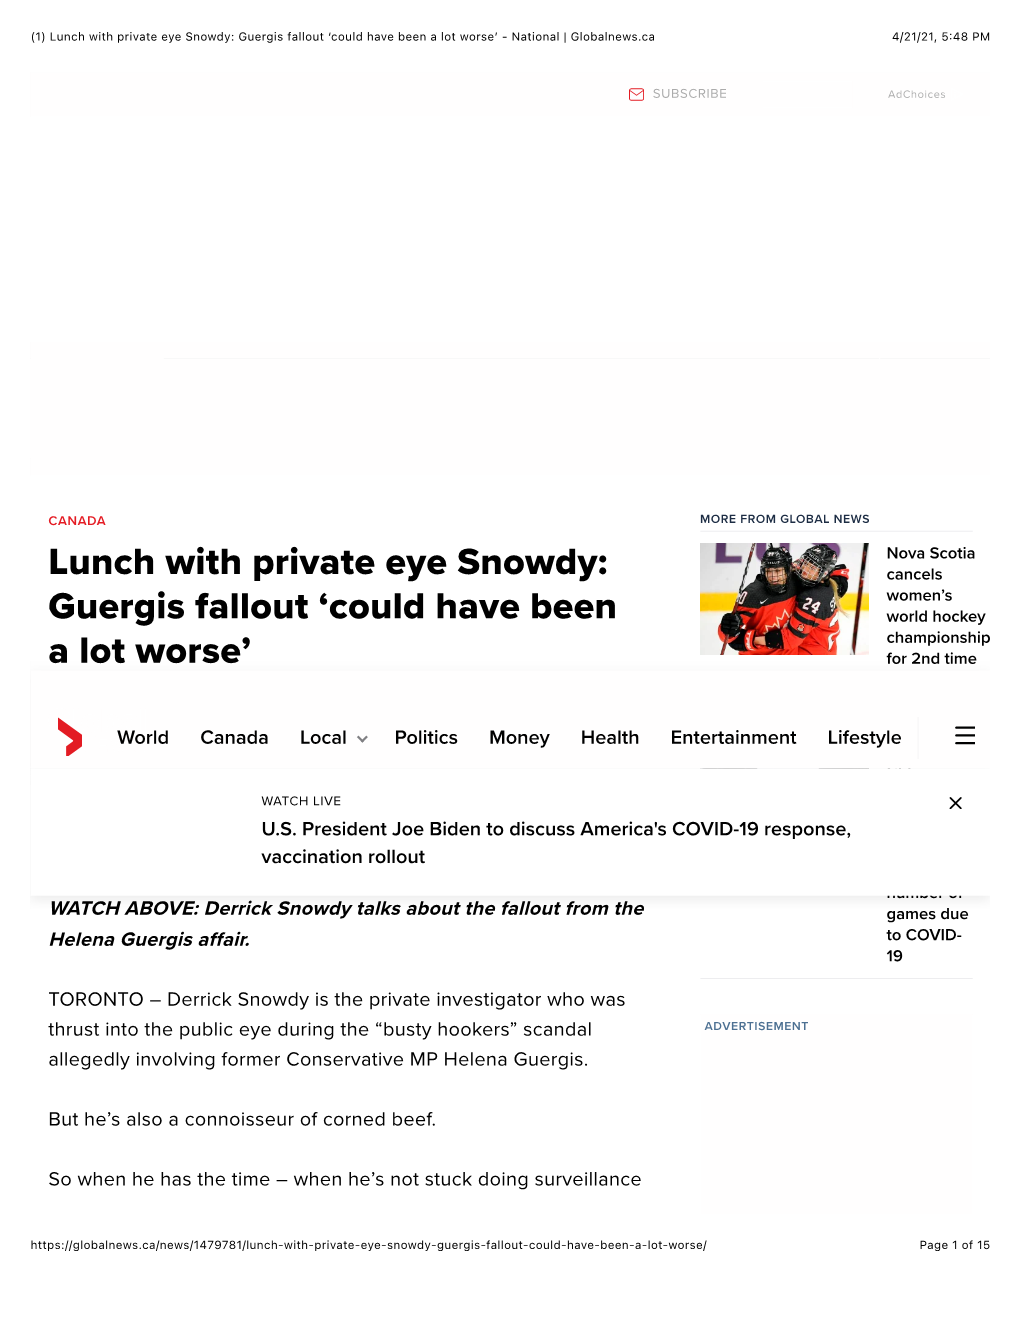 (1) Lunch with Private Eye Snowdy: Guergis Fallout 'Could Have Been A